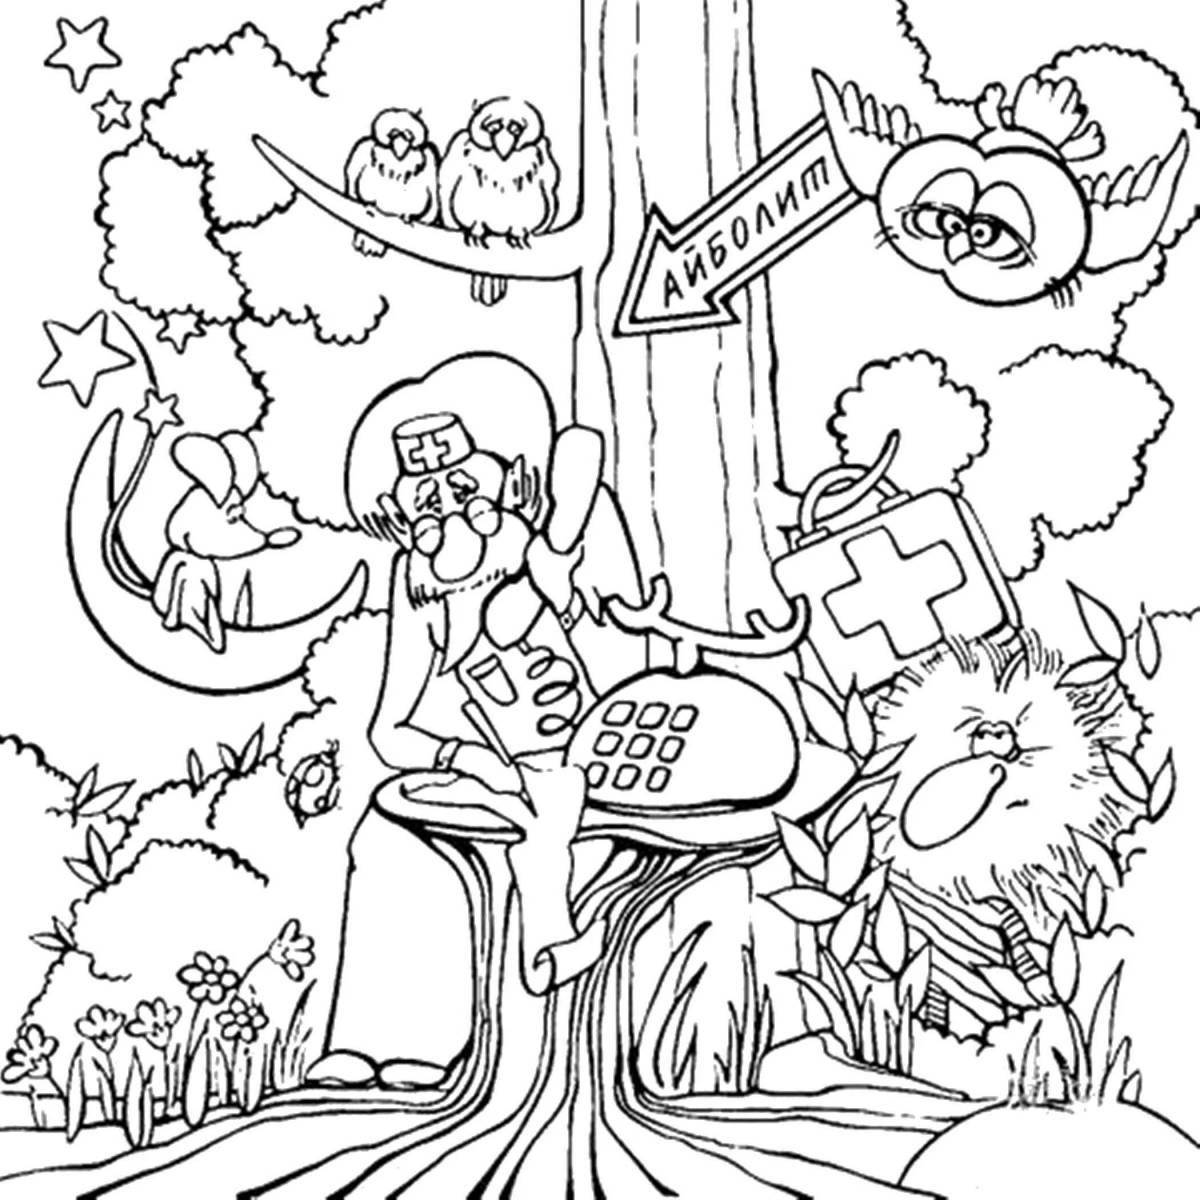 Wonderful fairy tale coloring book